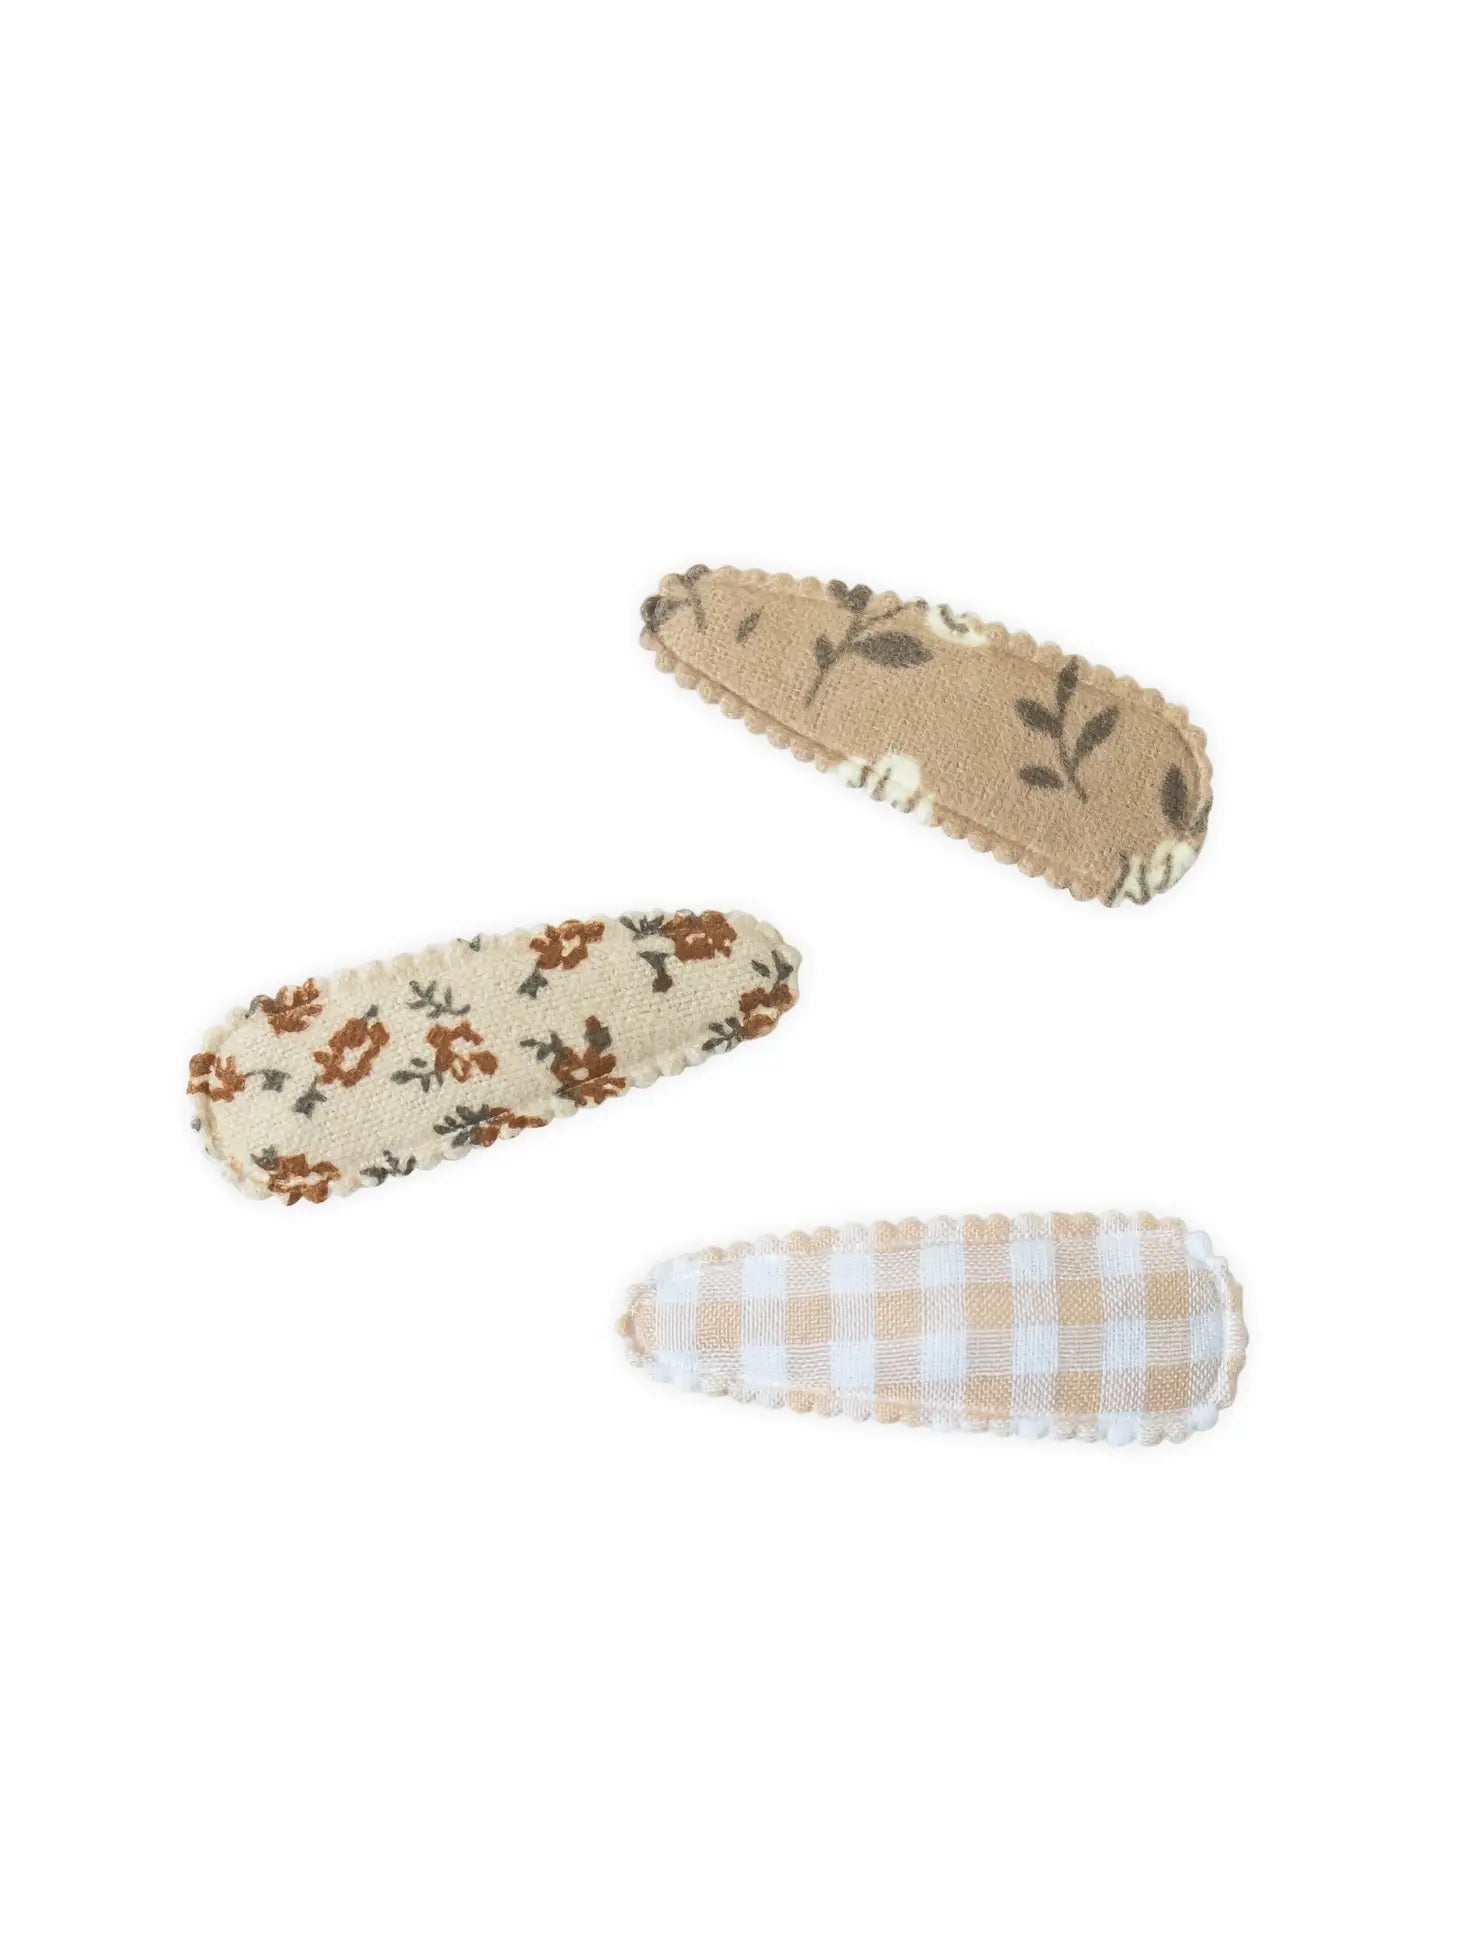 Baby Hair Clips 3 Pack - Tan Gingham